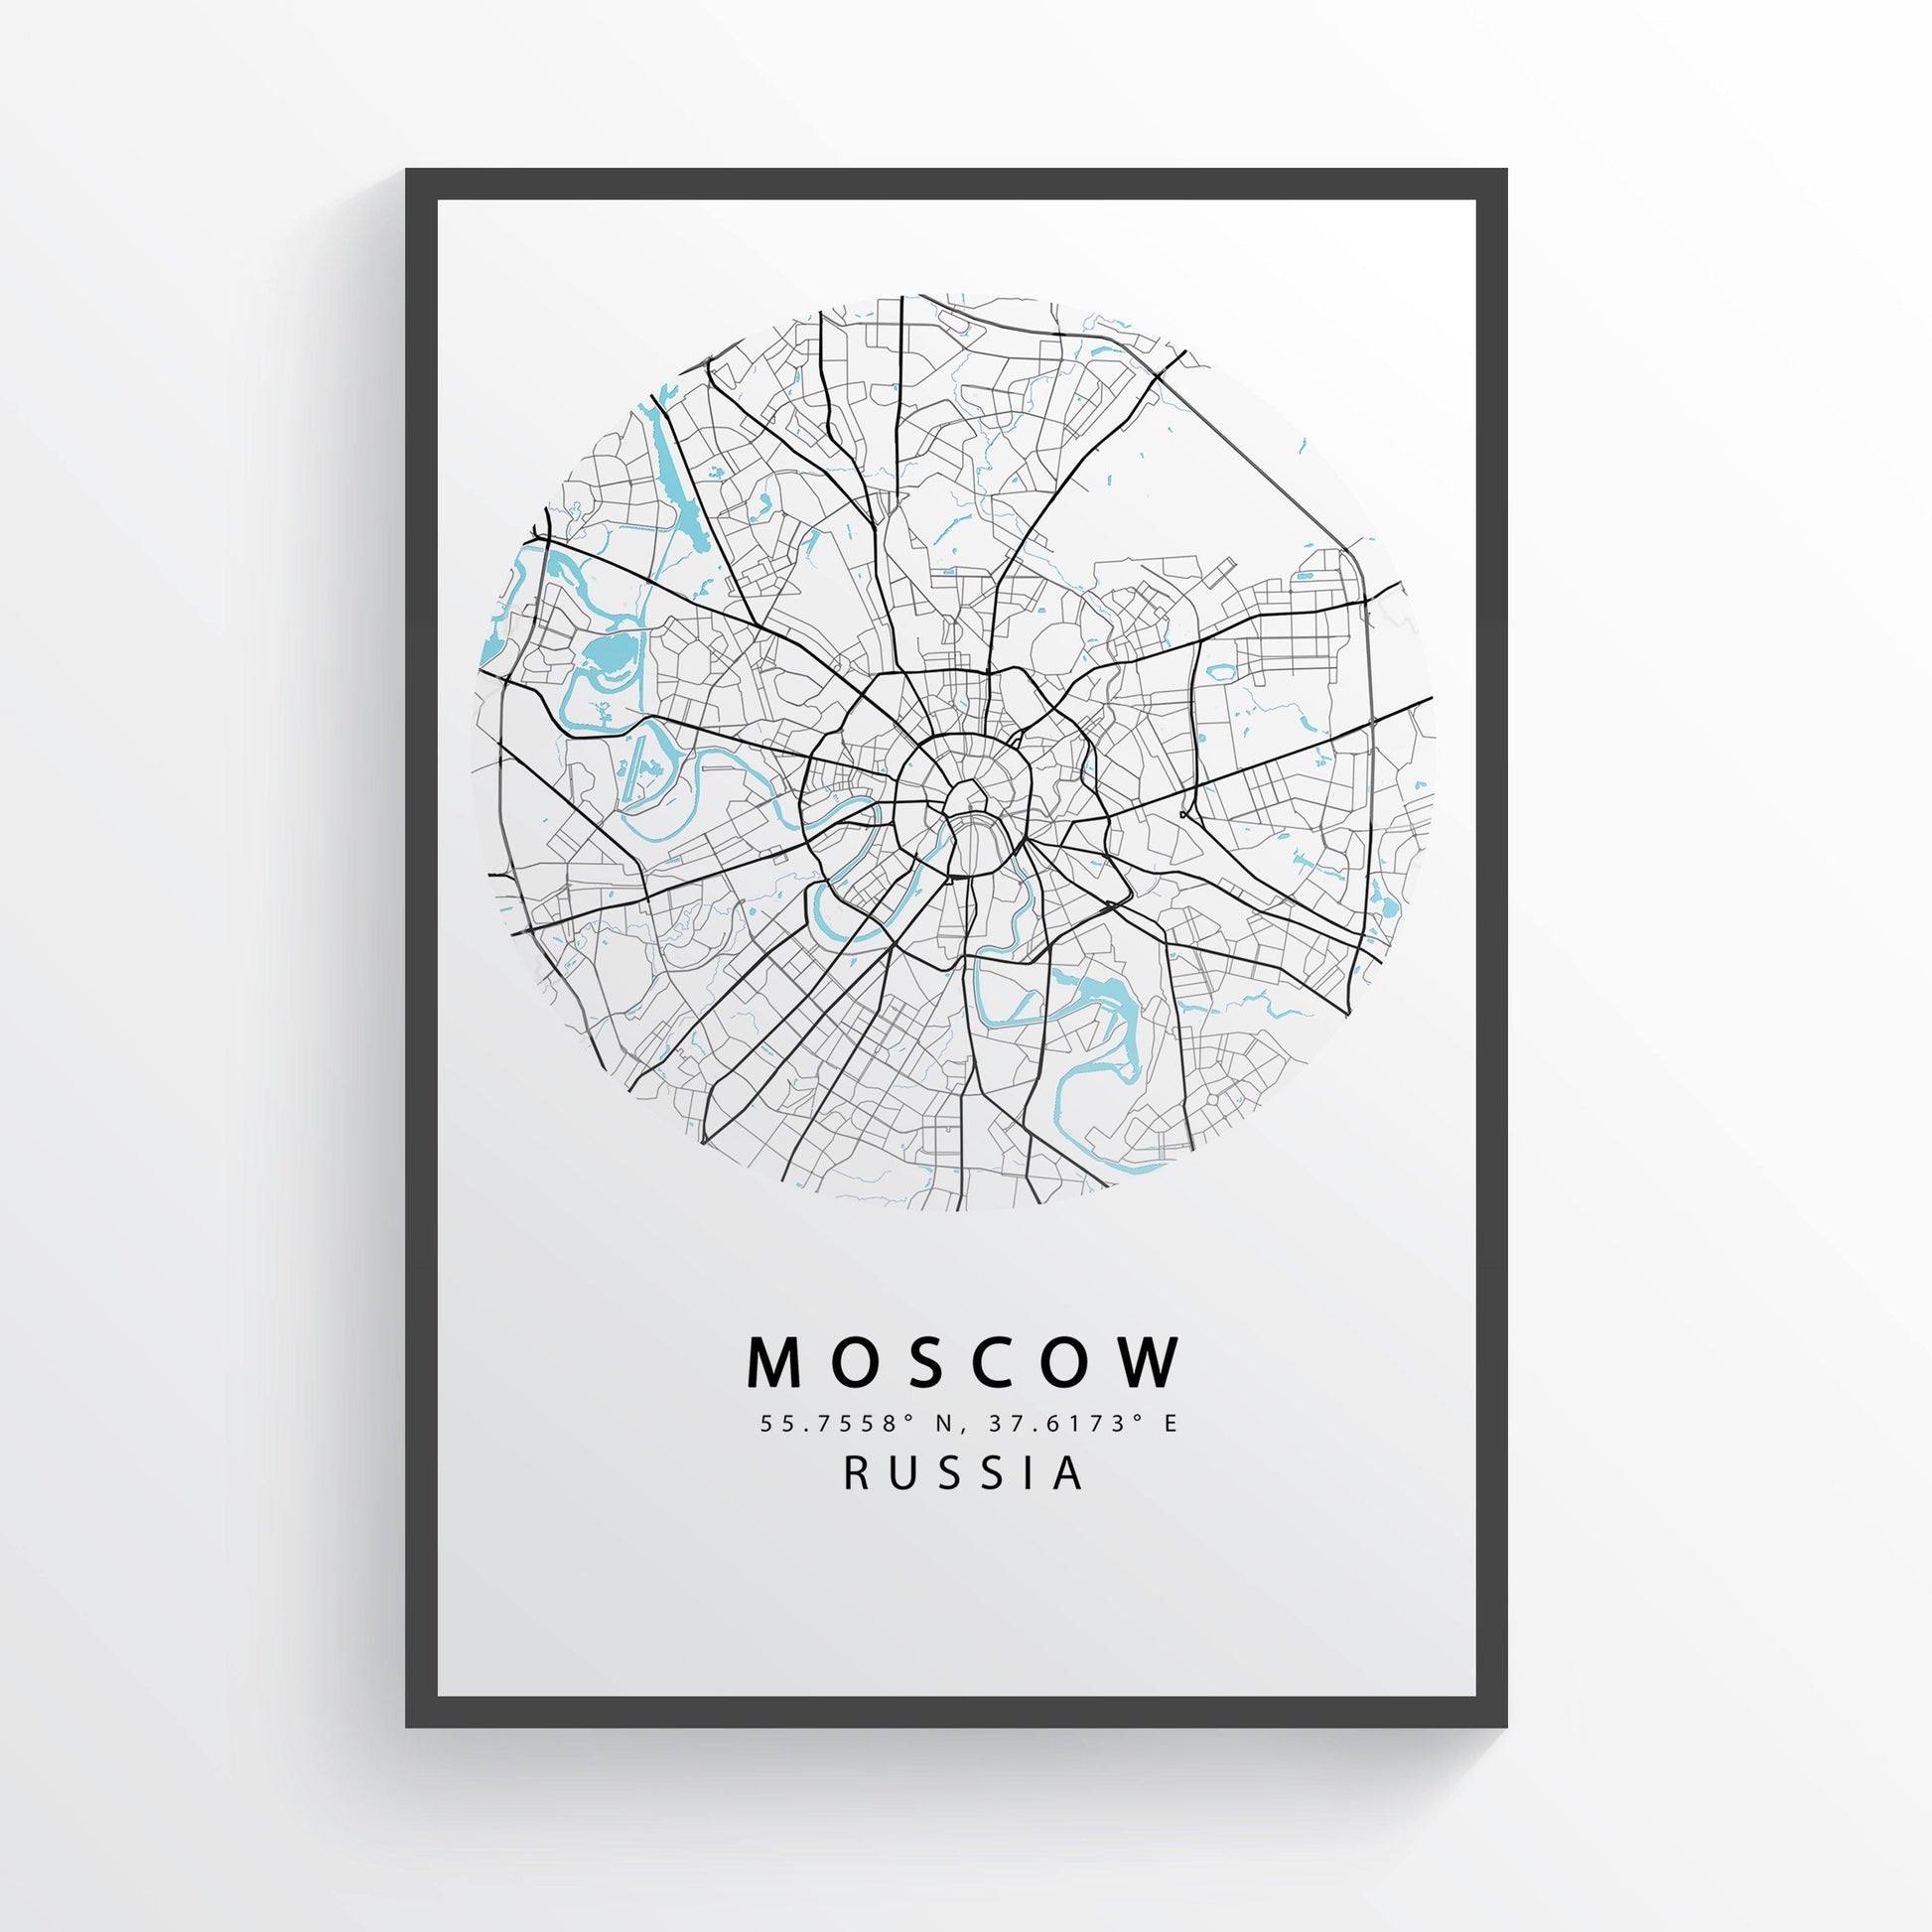 MOSCOW Russia Map Print | Map Art Poster | Mосква Moskvá Russian | City Street Road Map Print